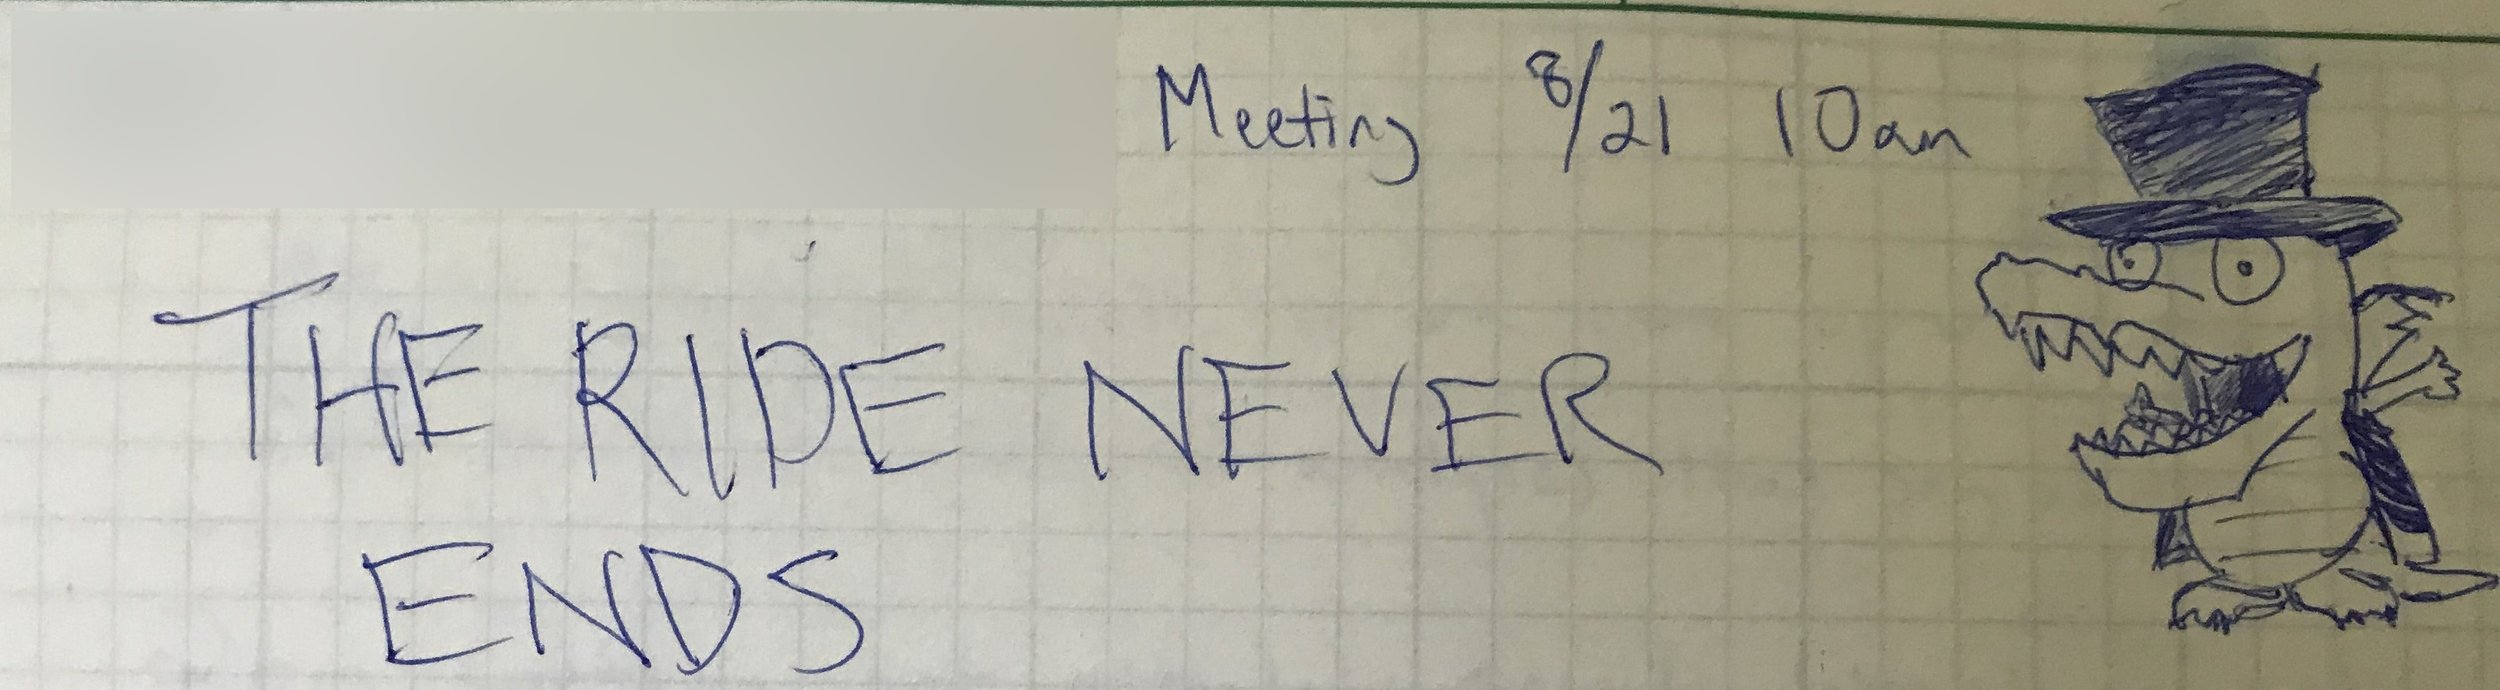  This was the millionth time this topic had come up in this meeting.  My “notes” go on to be  very  sarcastic. 